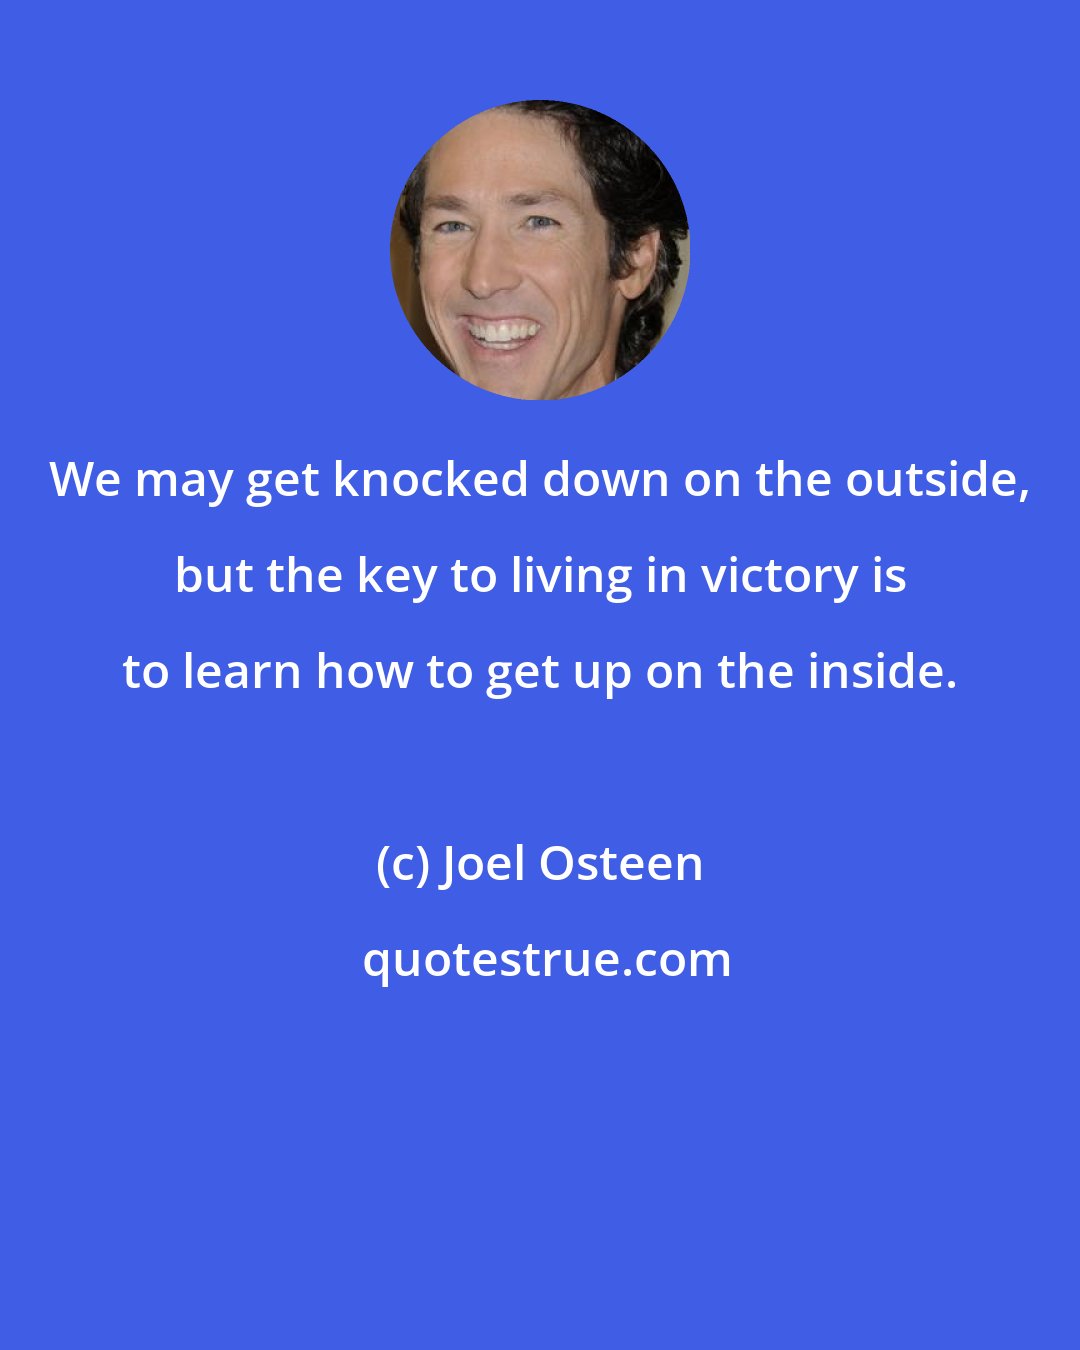 Joel Osteen: We may get knocked down on the outside, but the key to living in victory is to learn how to get up on the inside.